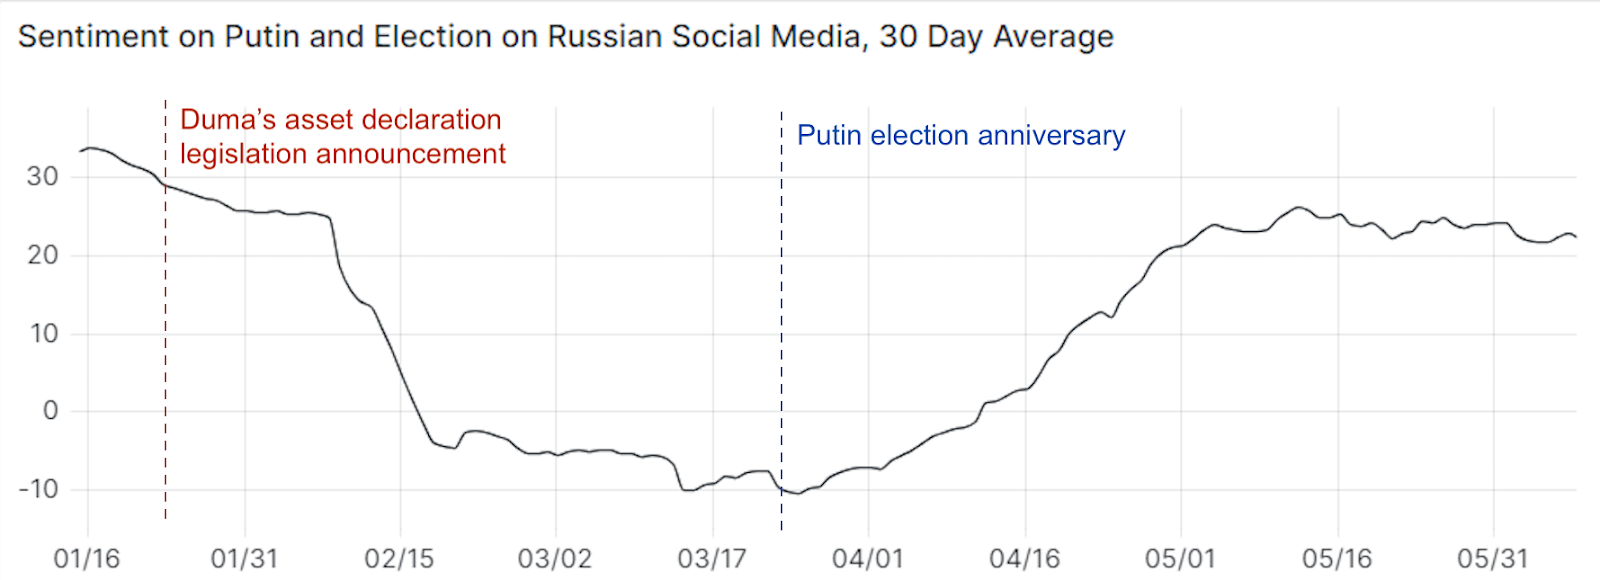 What’s going on in the Russian presidential election?